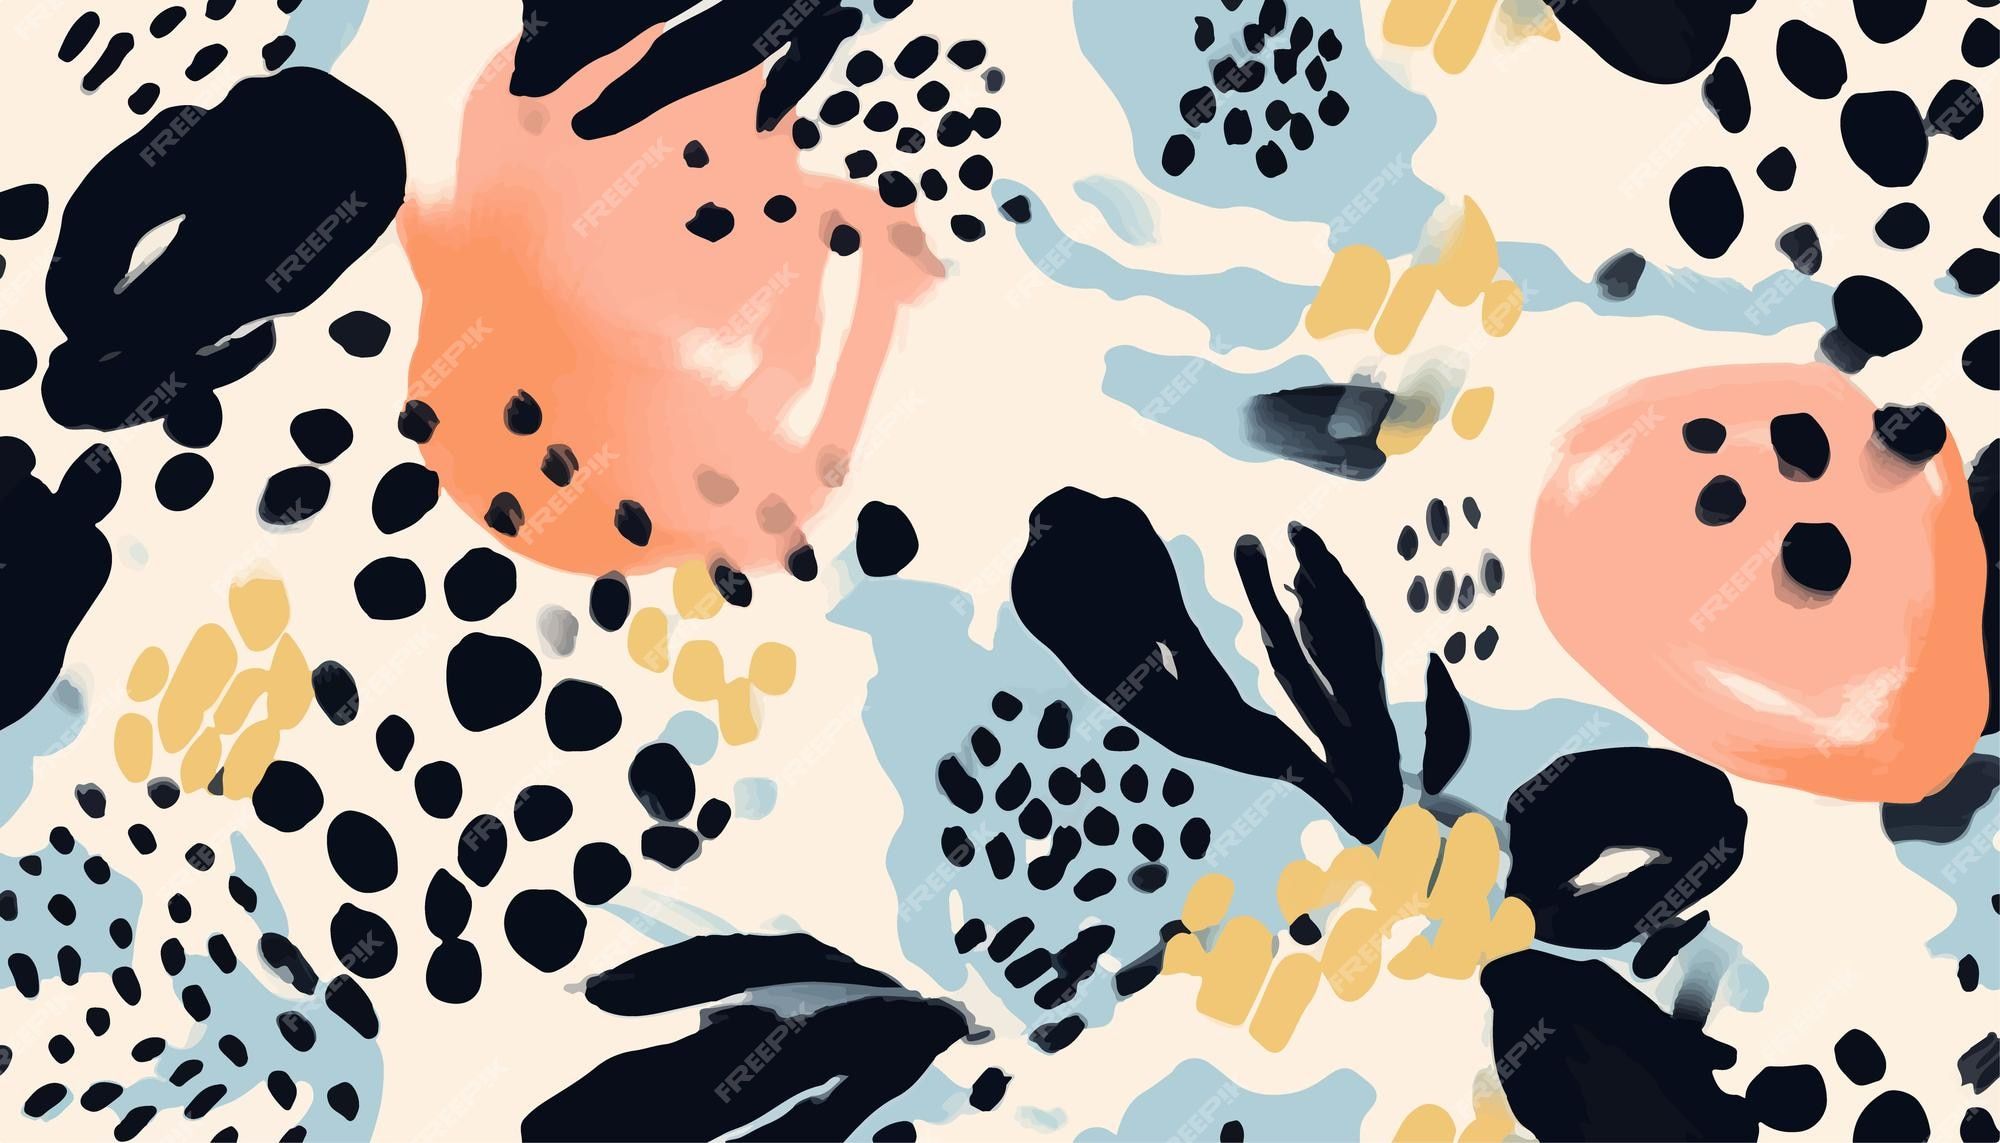 Premium Vector. Bright hand drawn flowers and leopard skin print modern abstract pattern fashionable for design